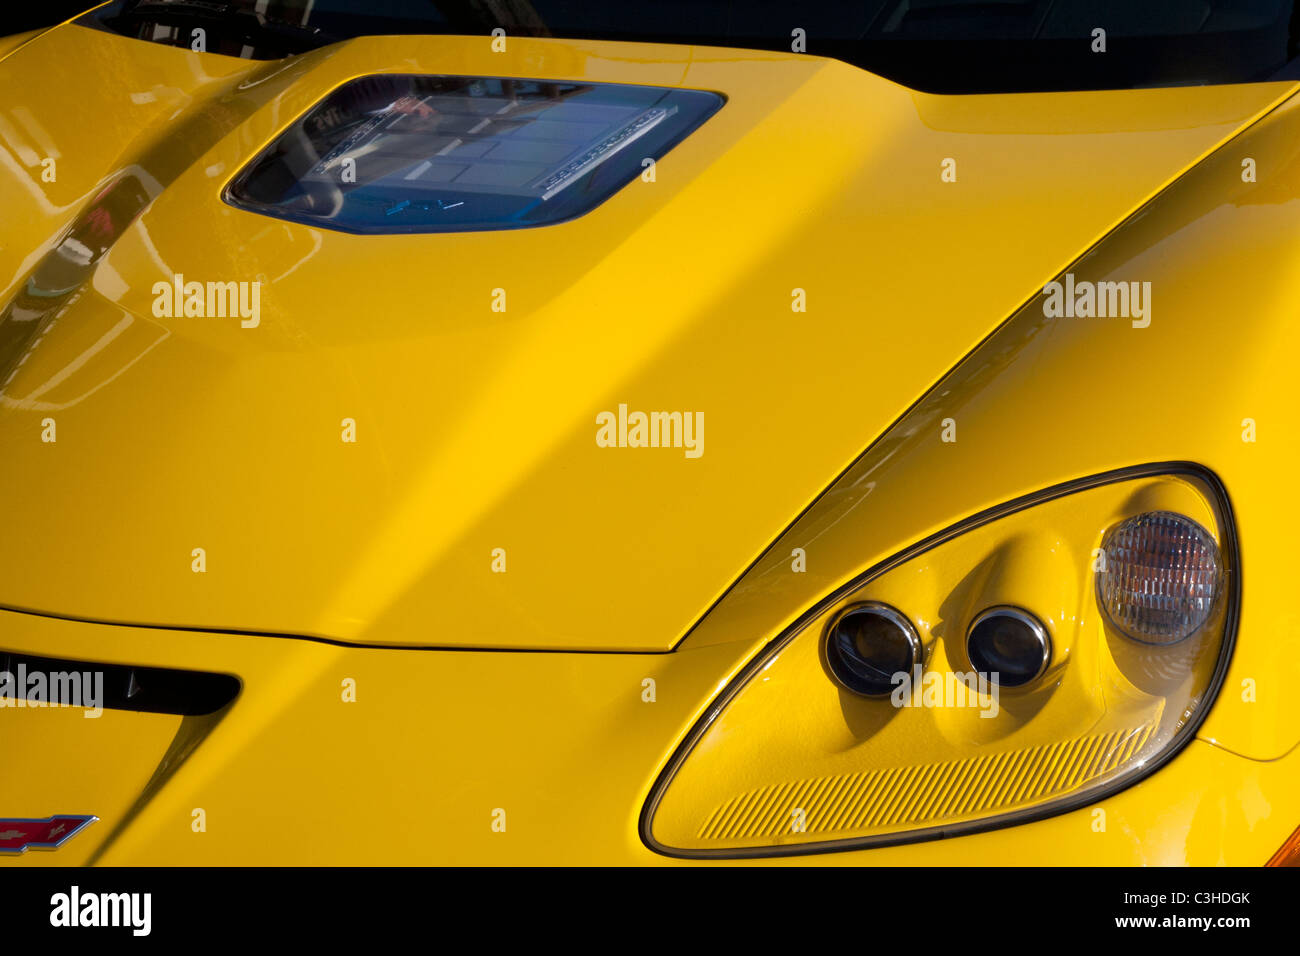 Detail of Front End of Yellow Corvette Stock Photo